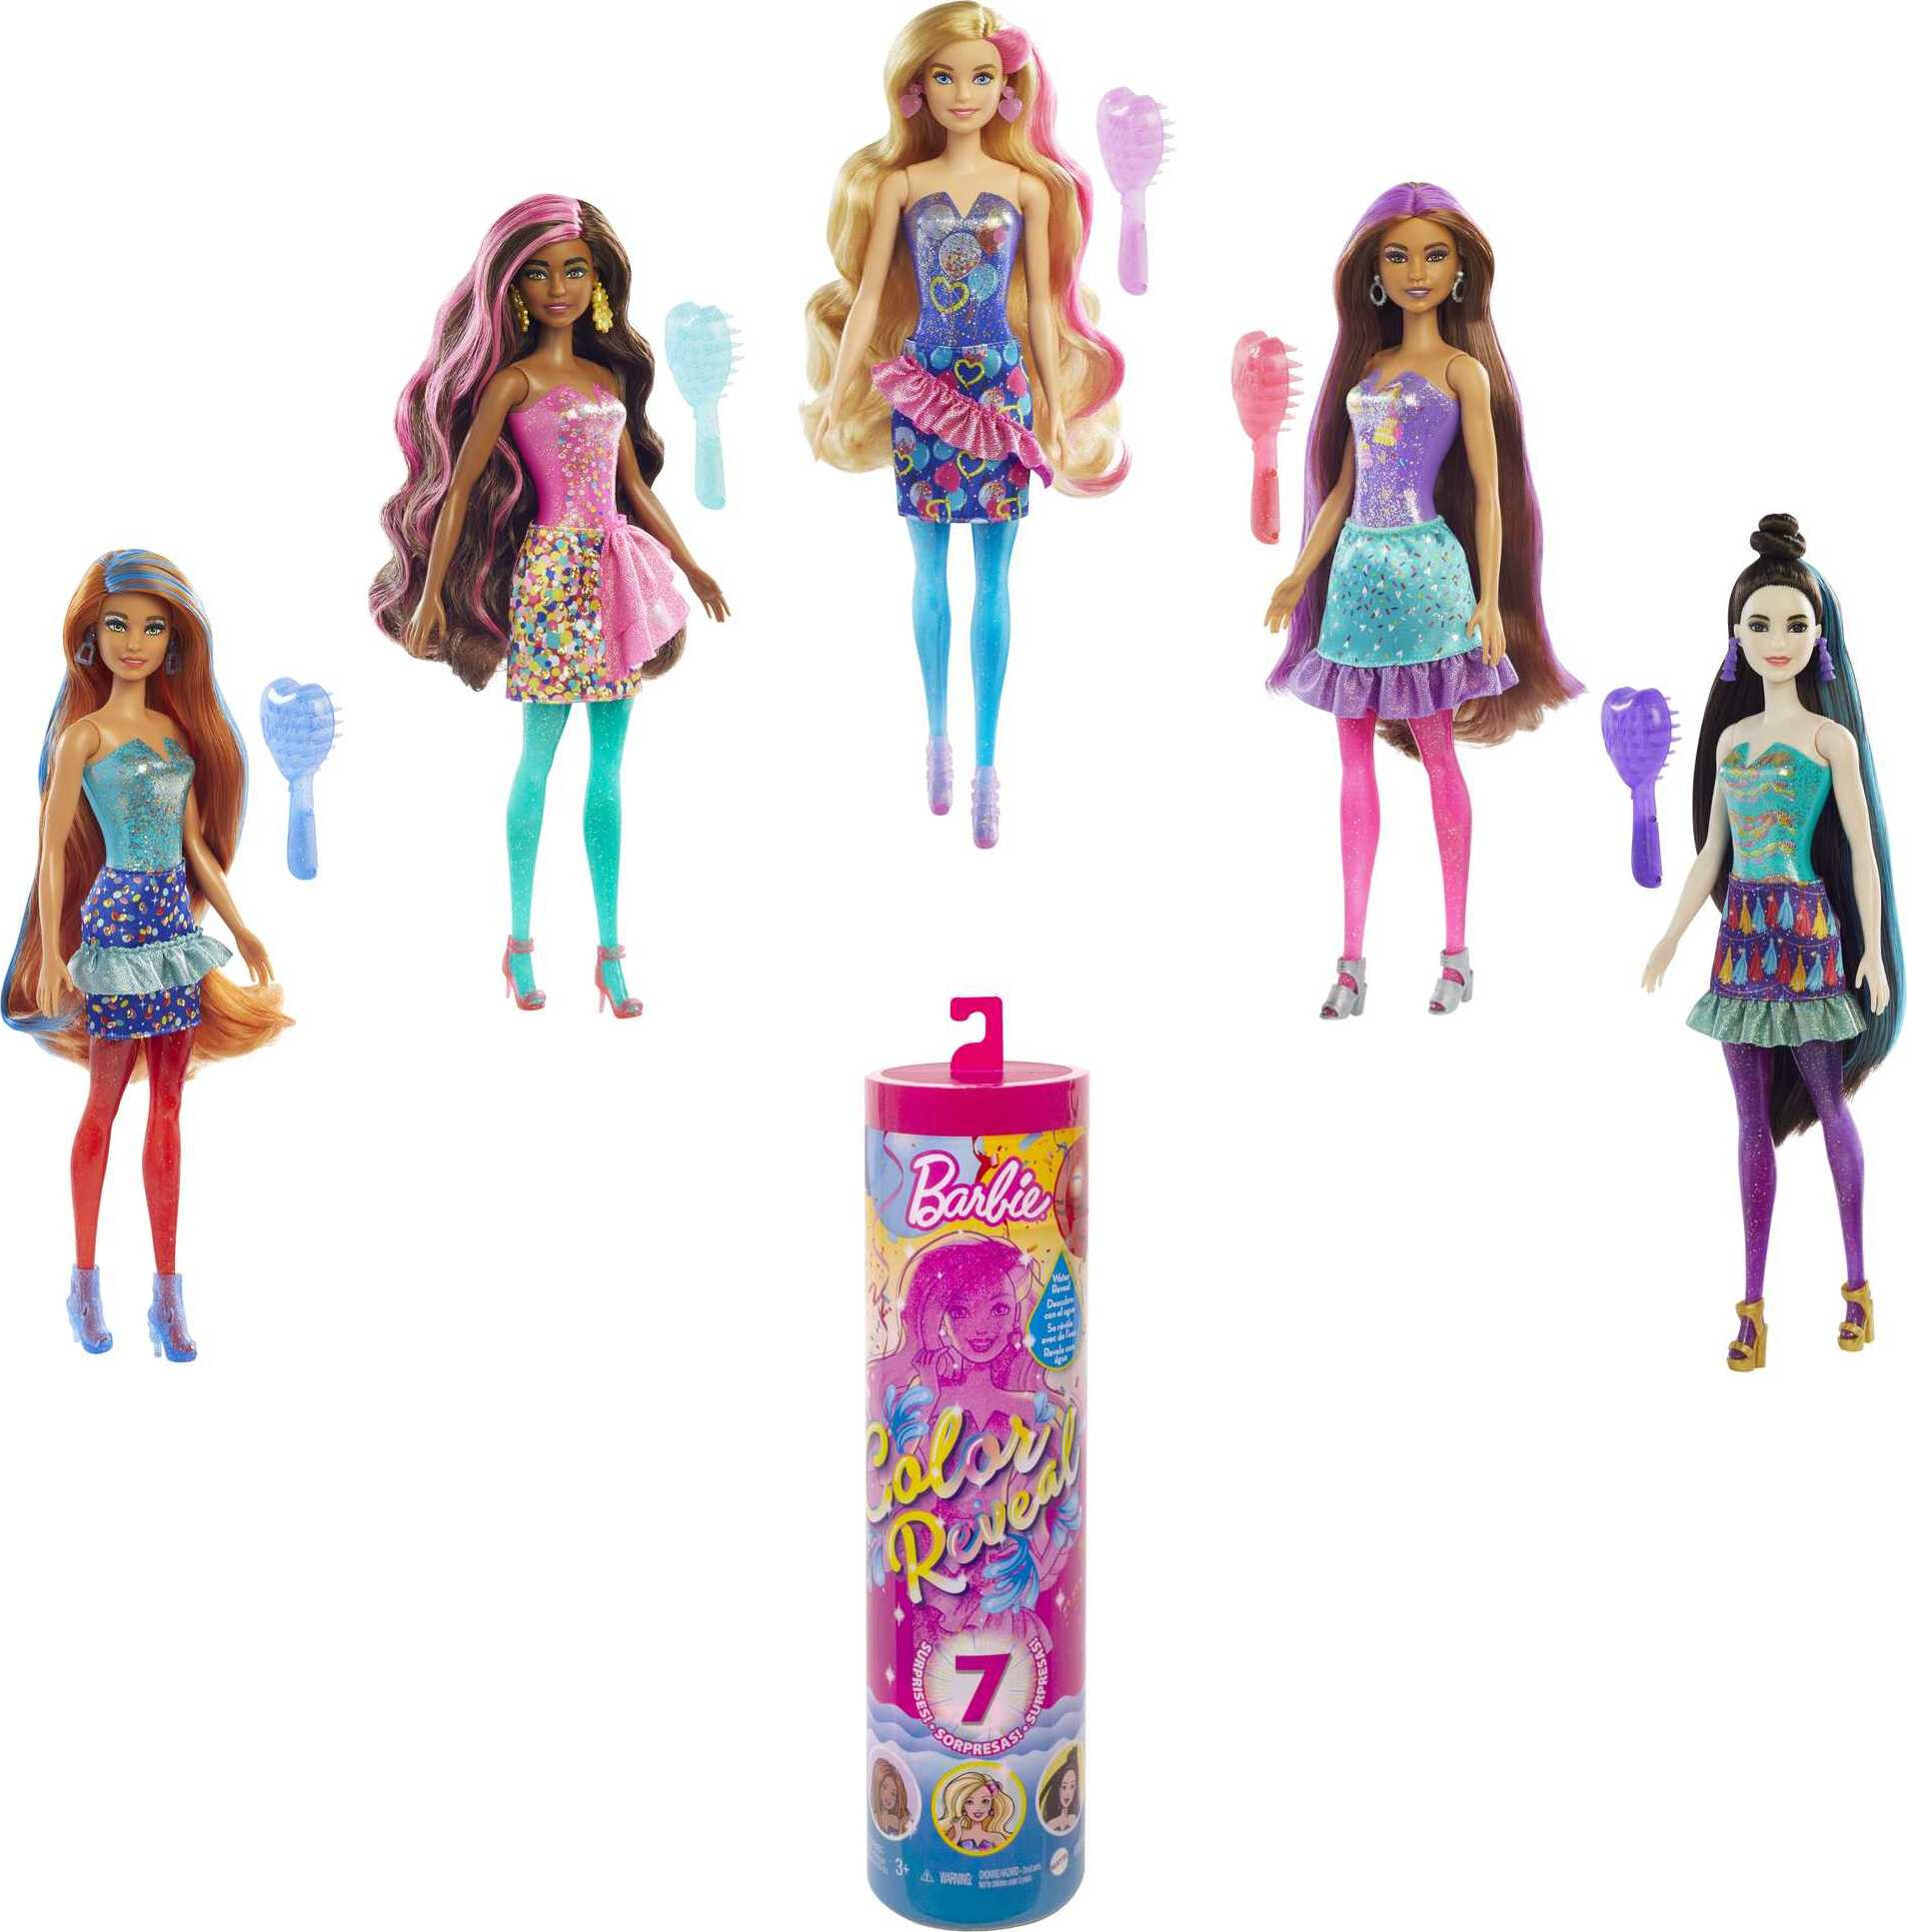 Barbie Color Reveal Party Series Fashion Doll & Accessories, 7 Surprises (Styles May Vary) - image 1 of 7